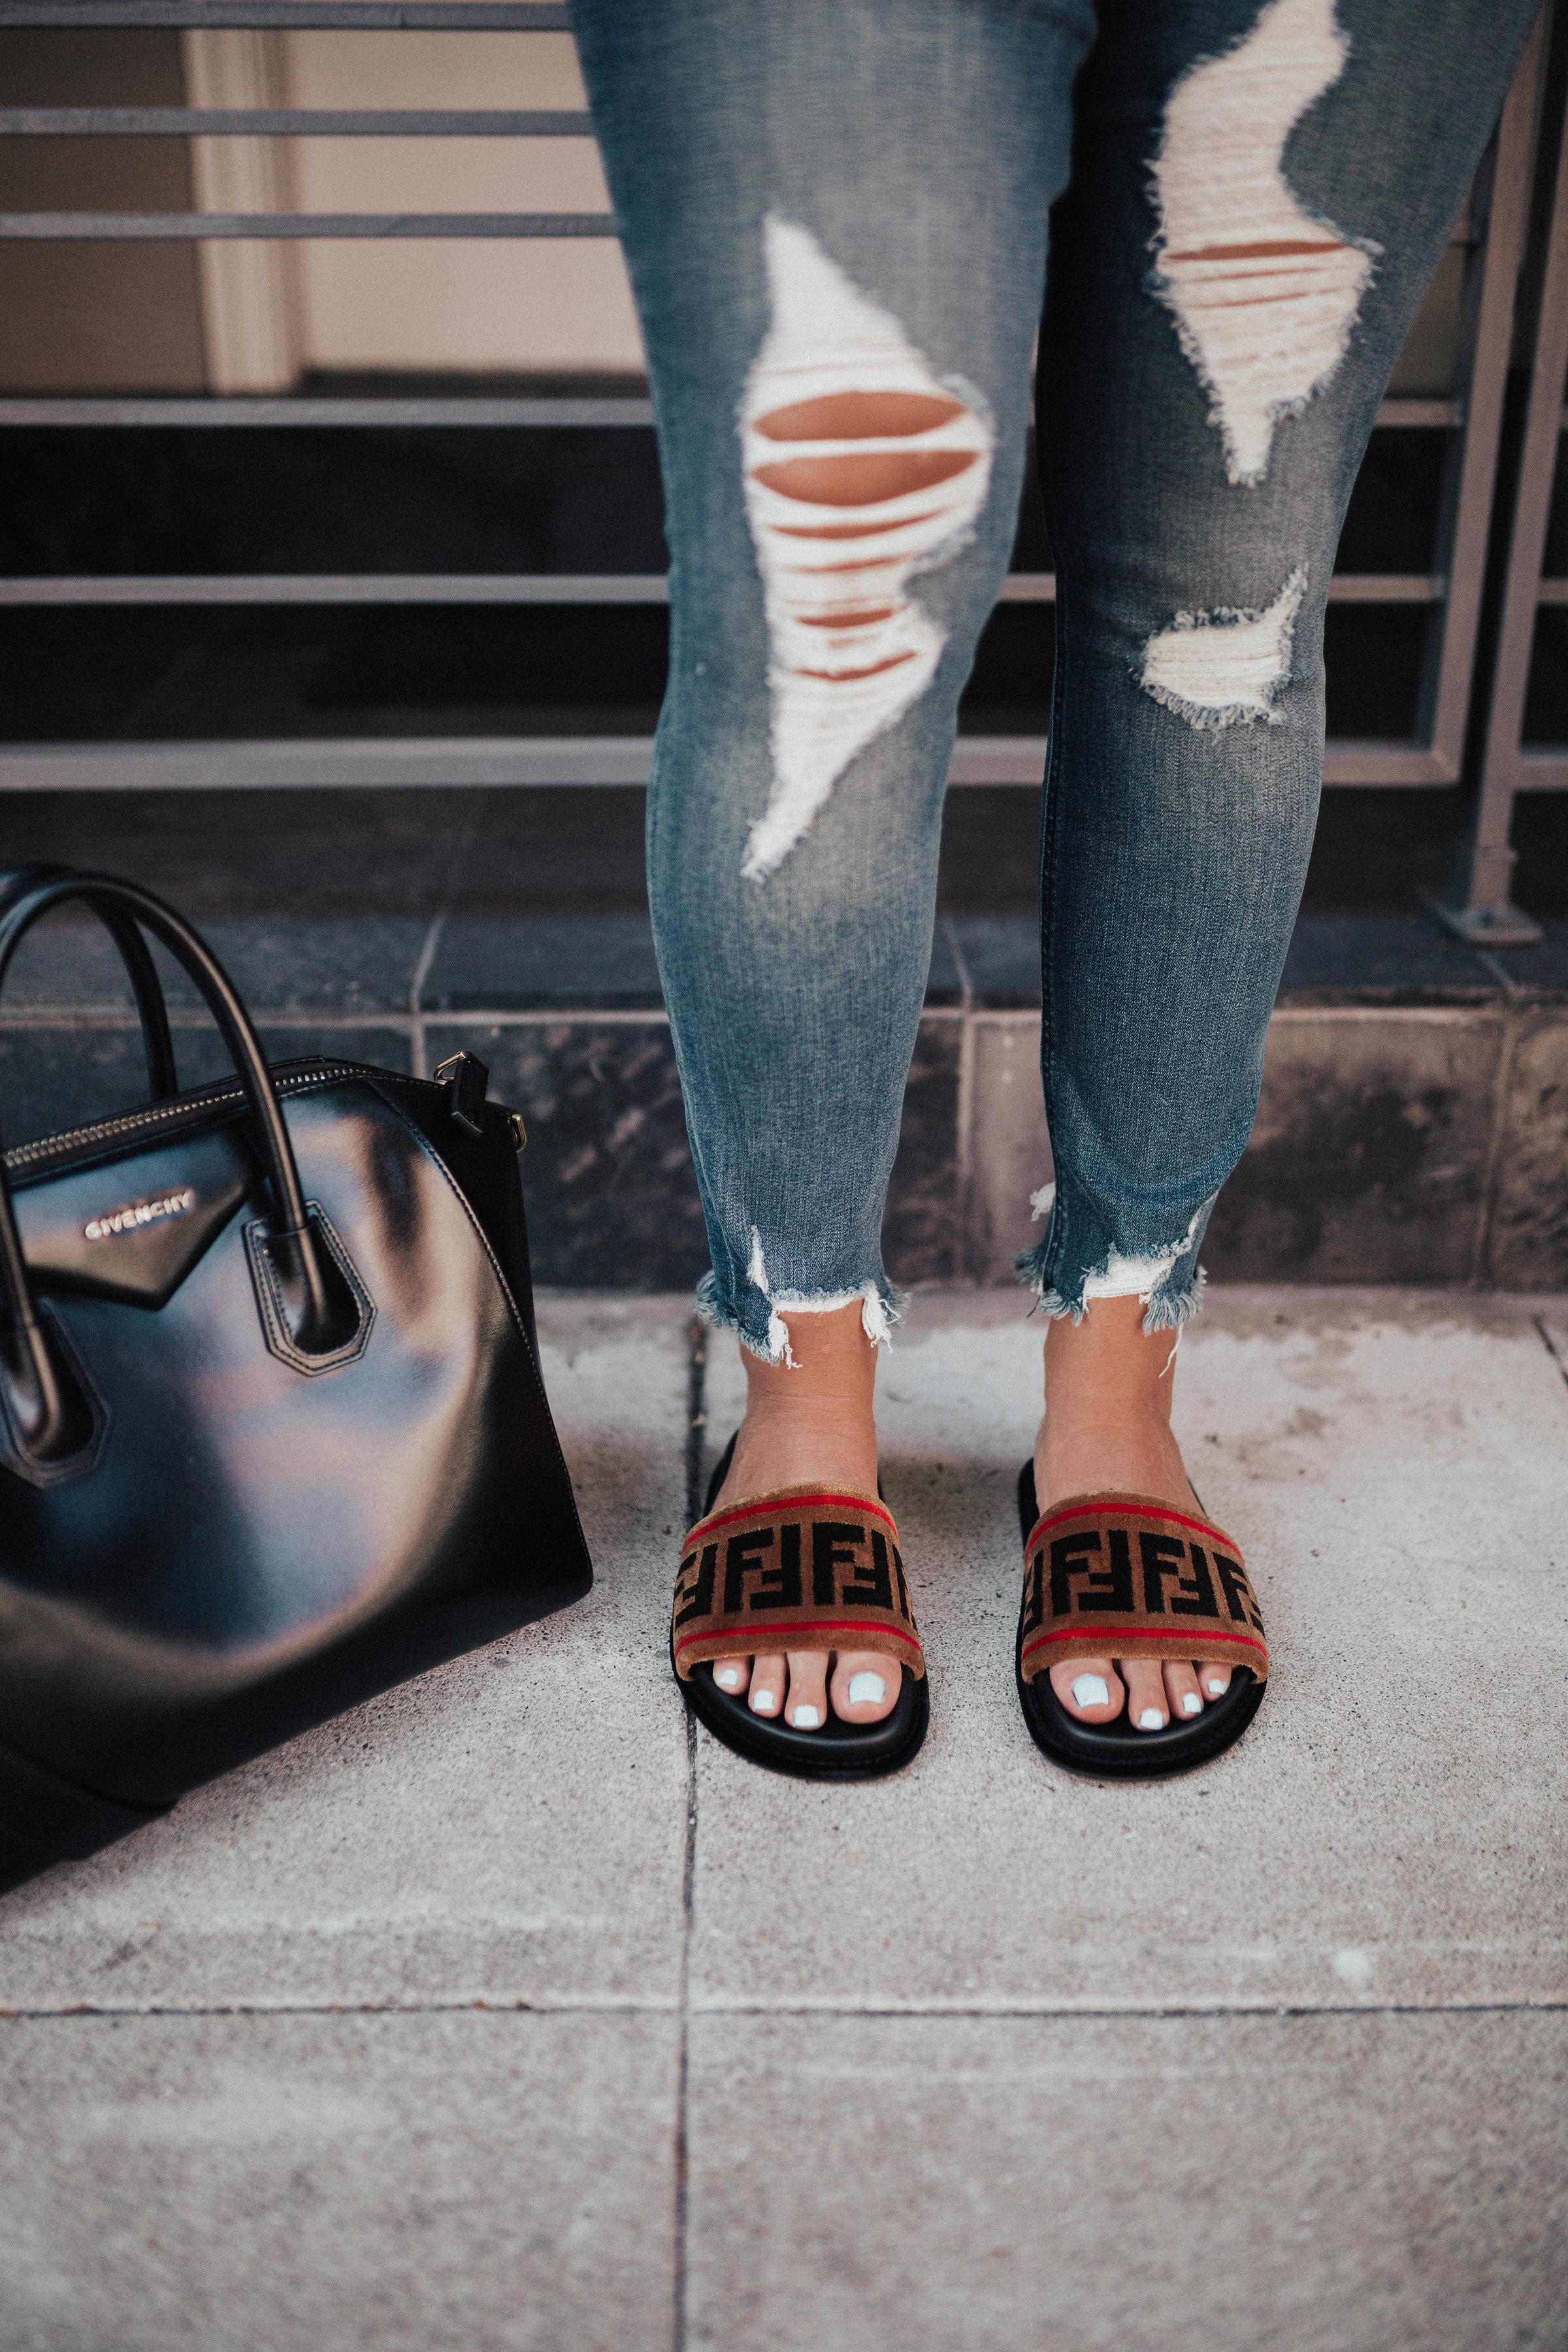 F is for Fendi. Ashley Zeal from Two Peas in a Prada wears the Fendi Logo Slides.